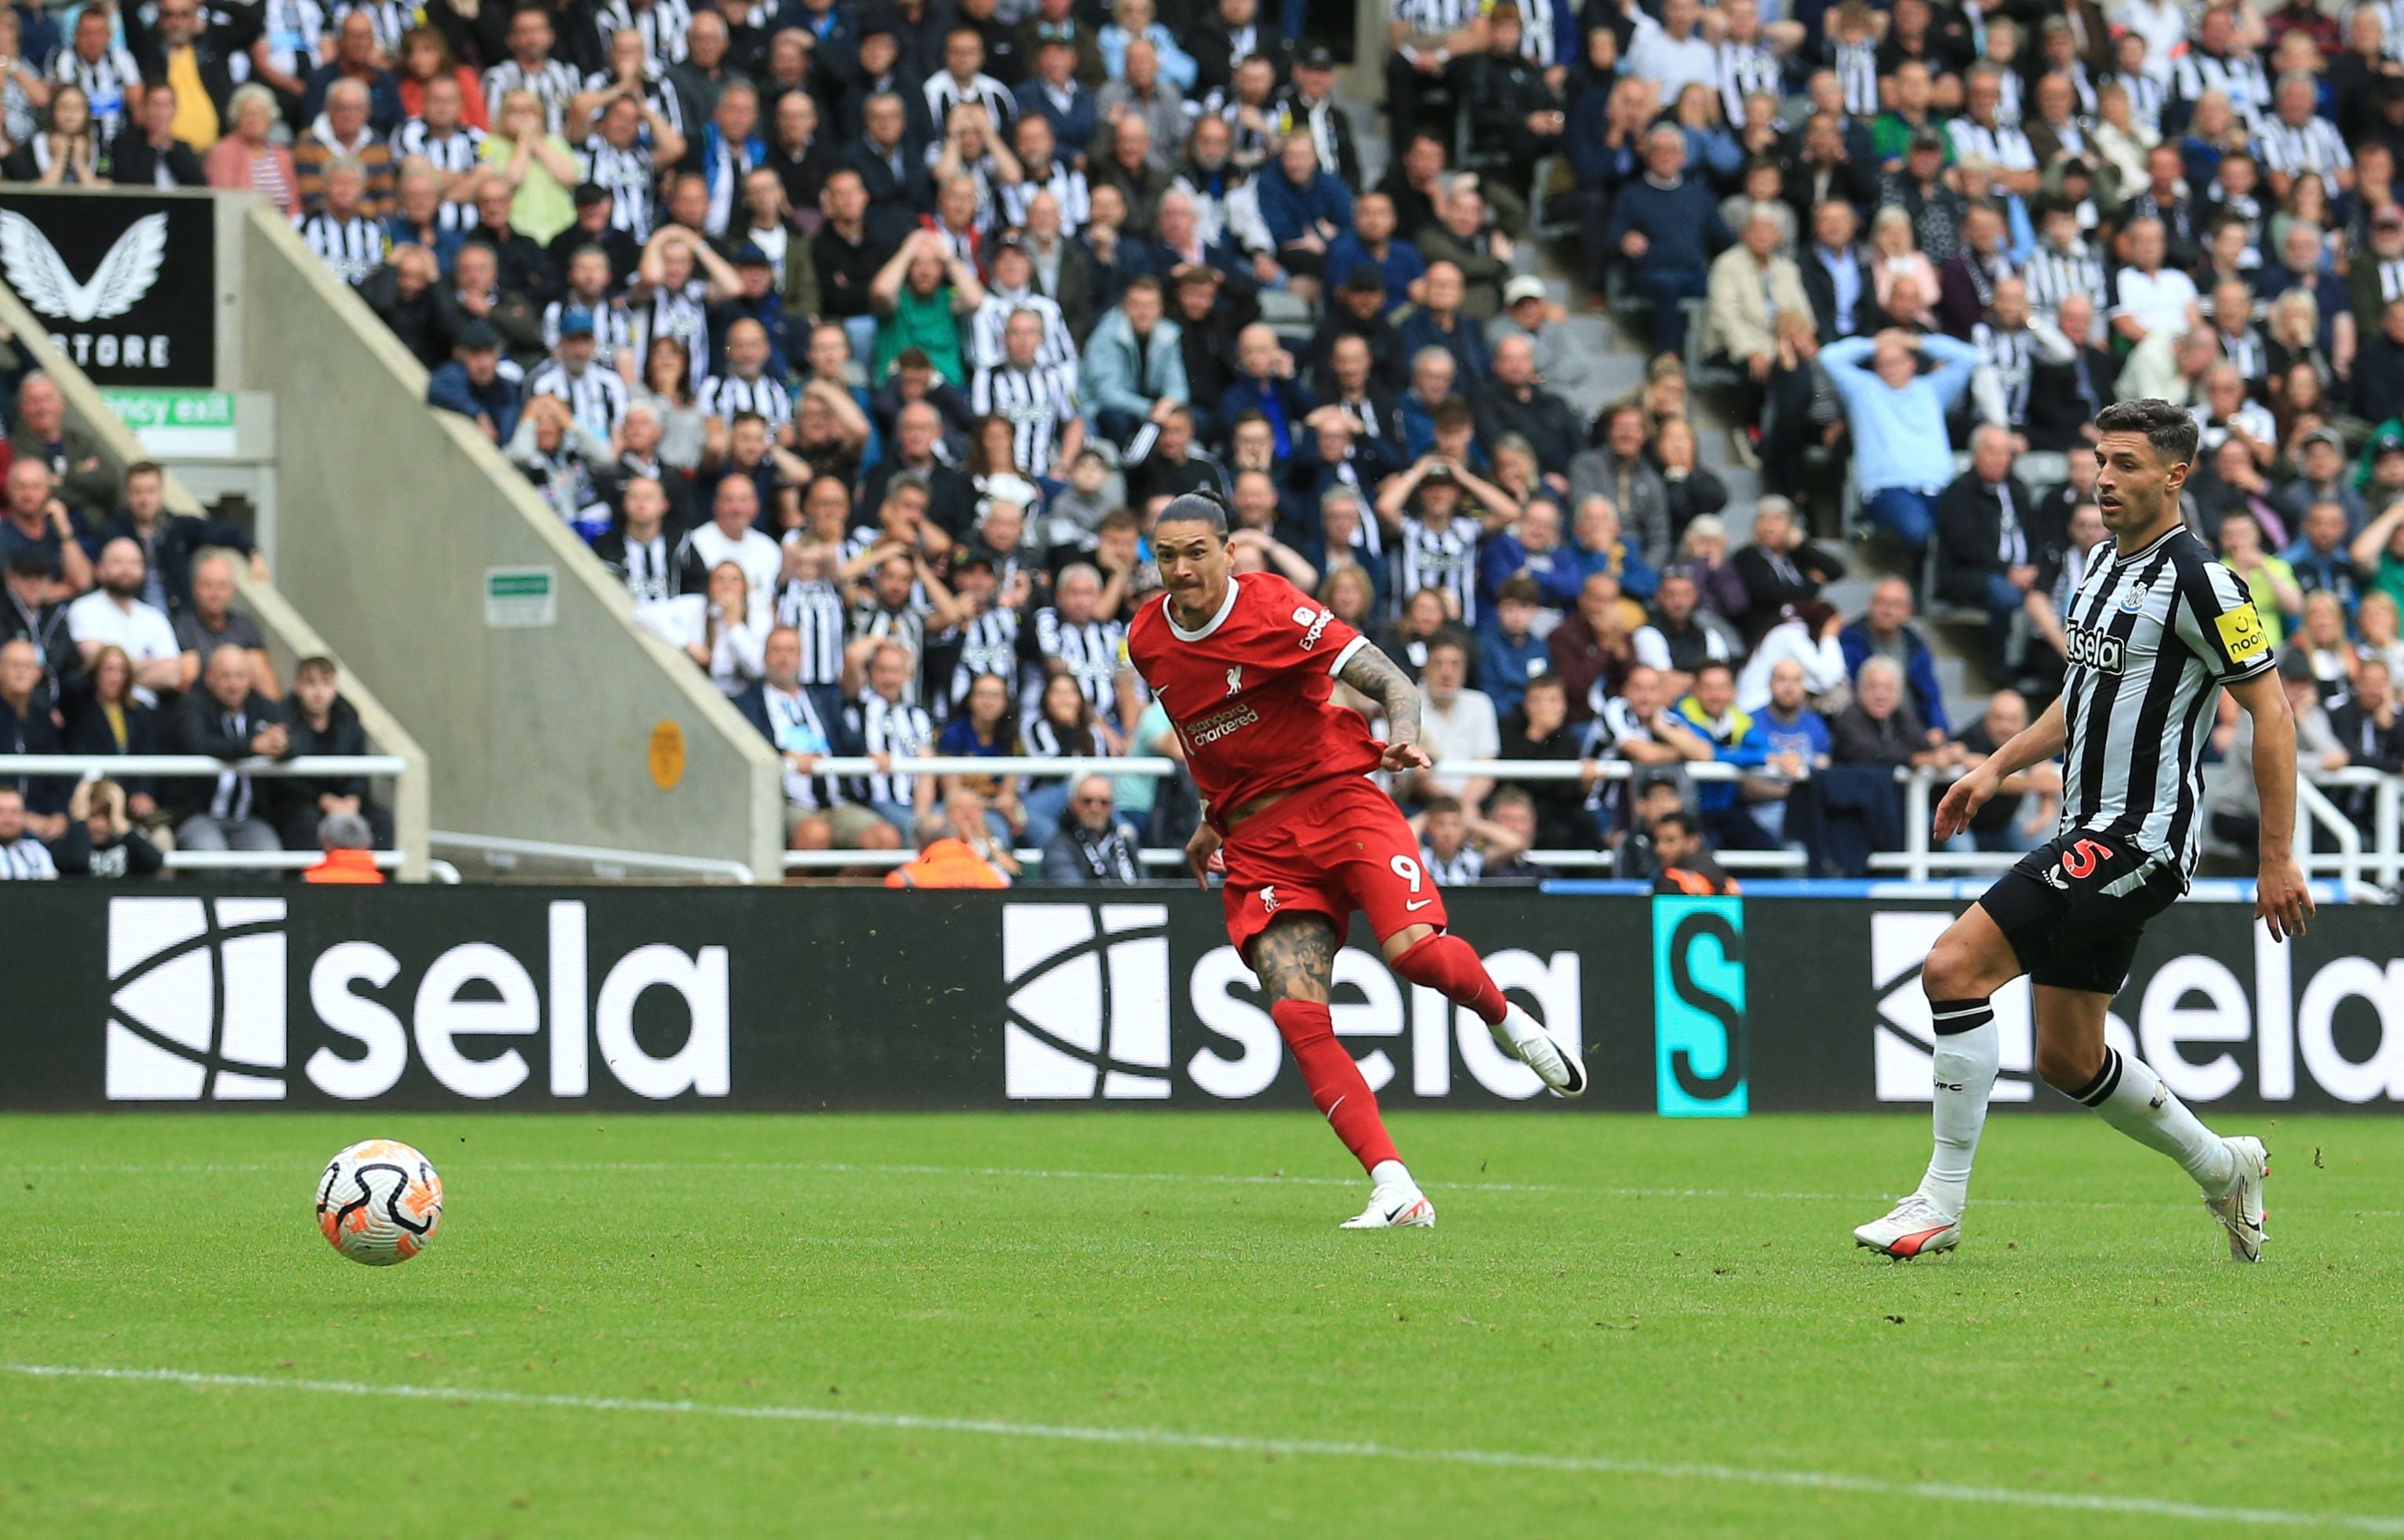 Darwin Nuñez double wins the game for Liverpool at Newcastle